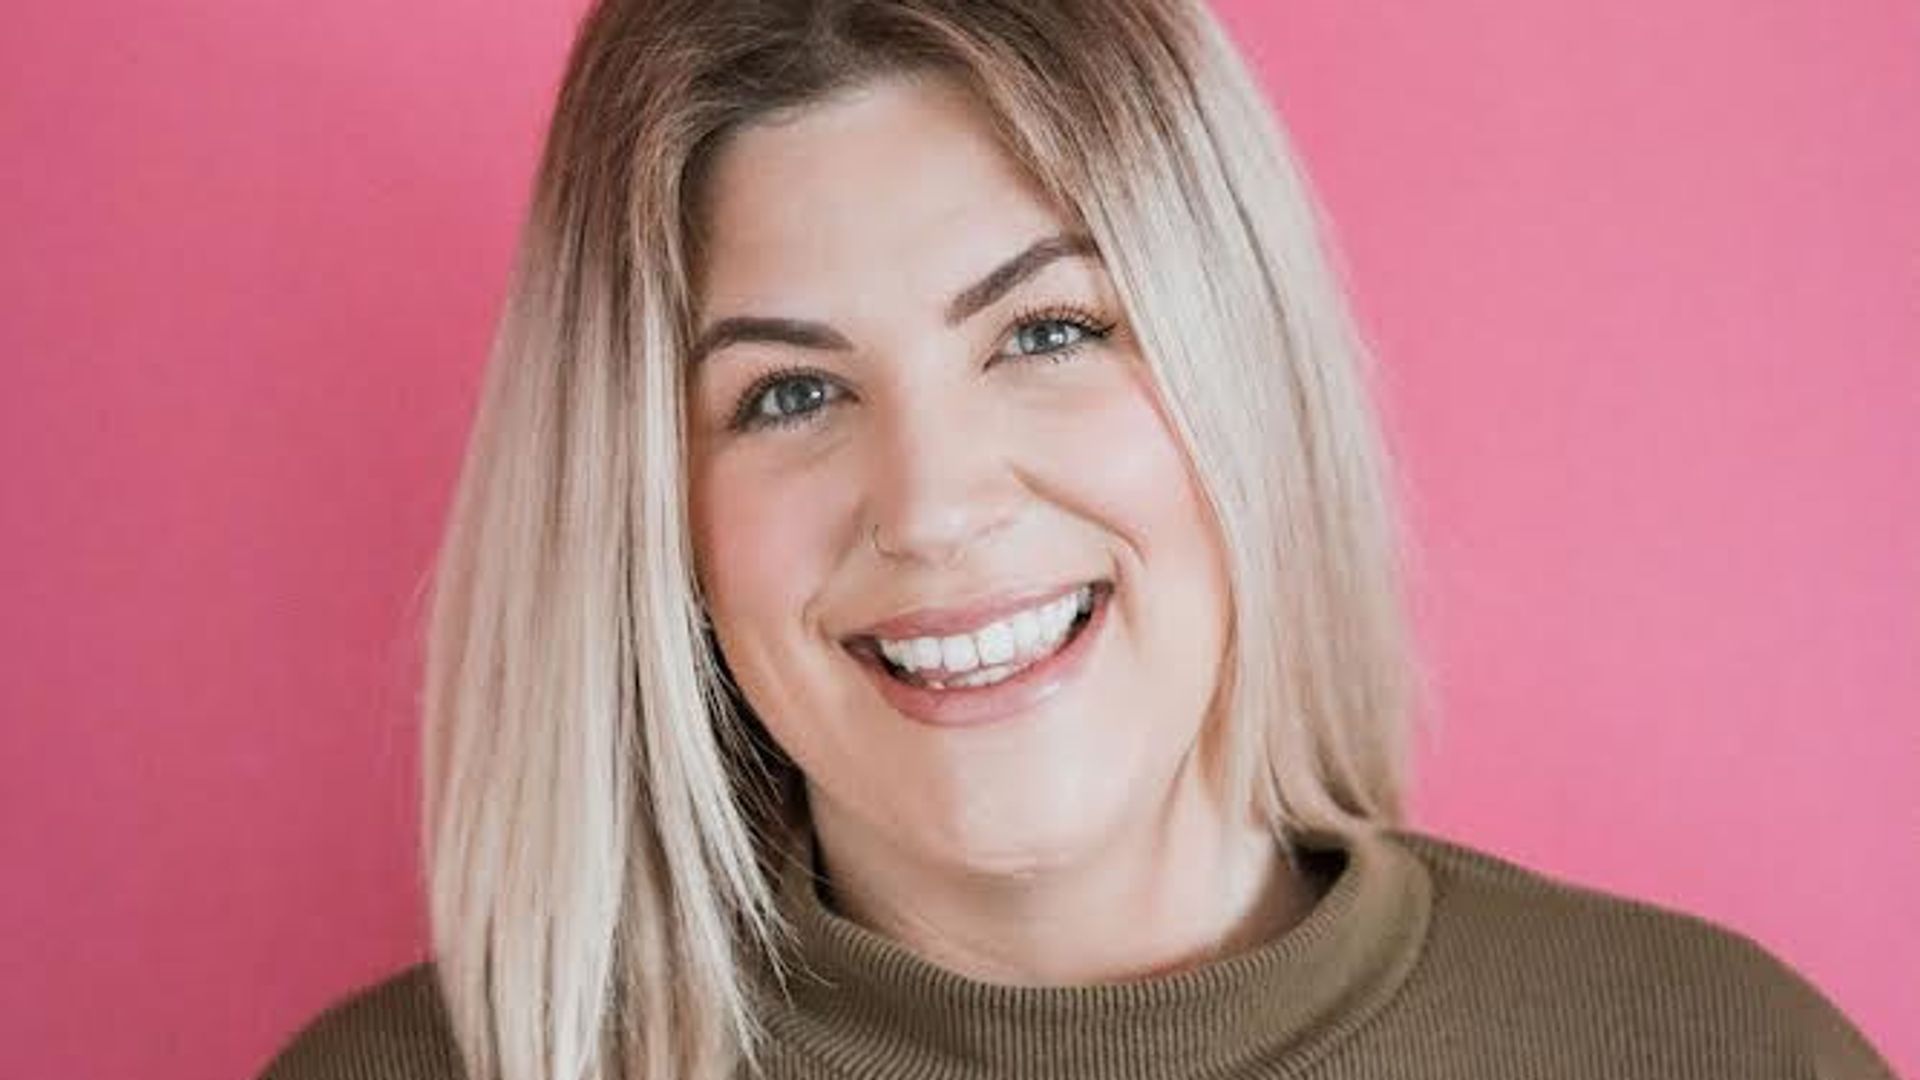 Smiling blonde woman in cosy jumper on pink background 